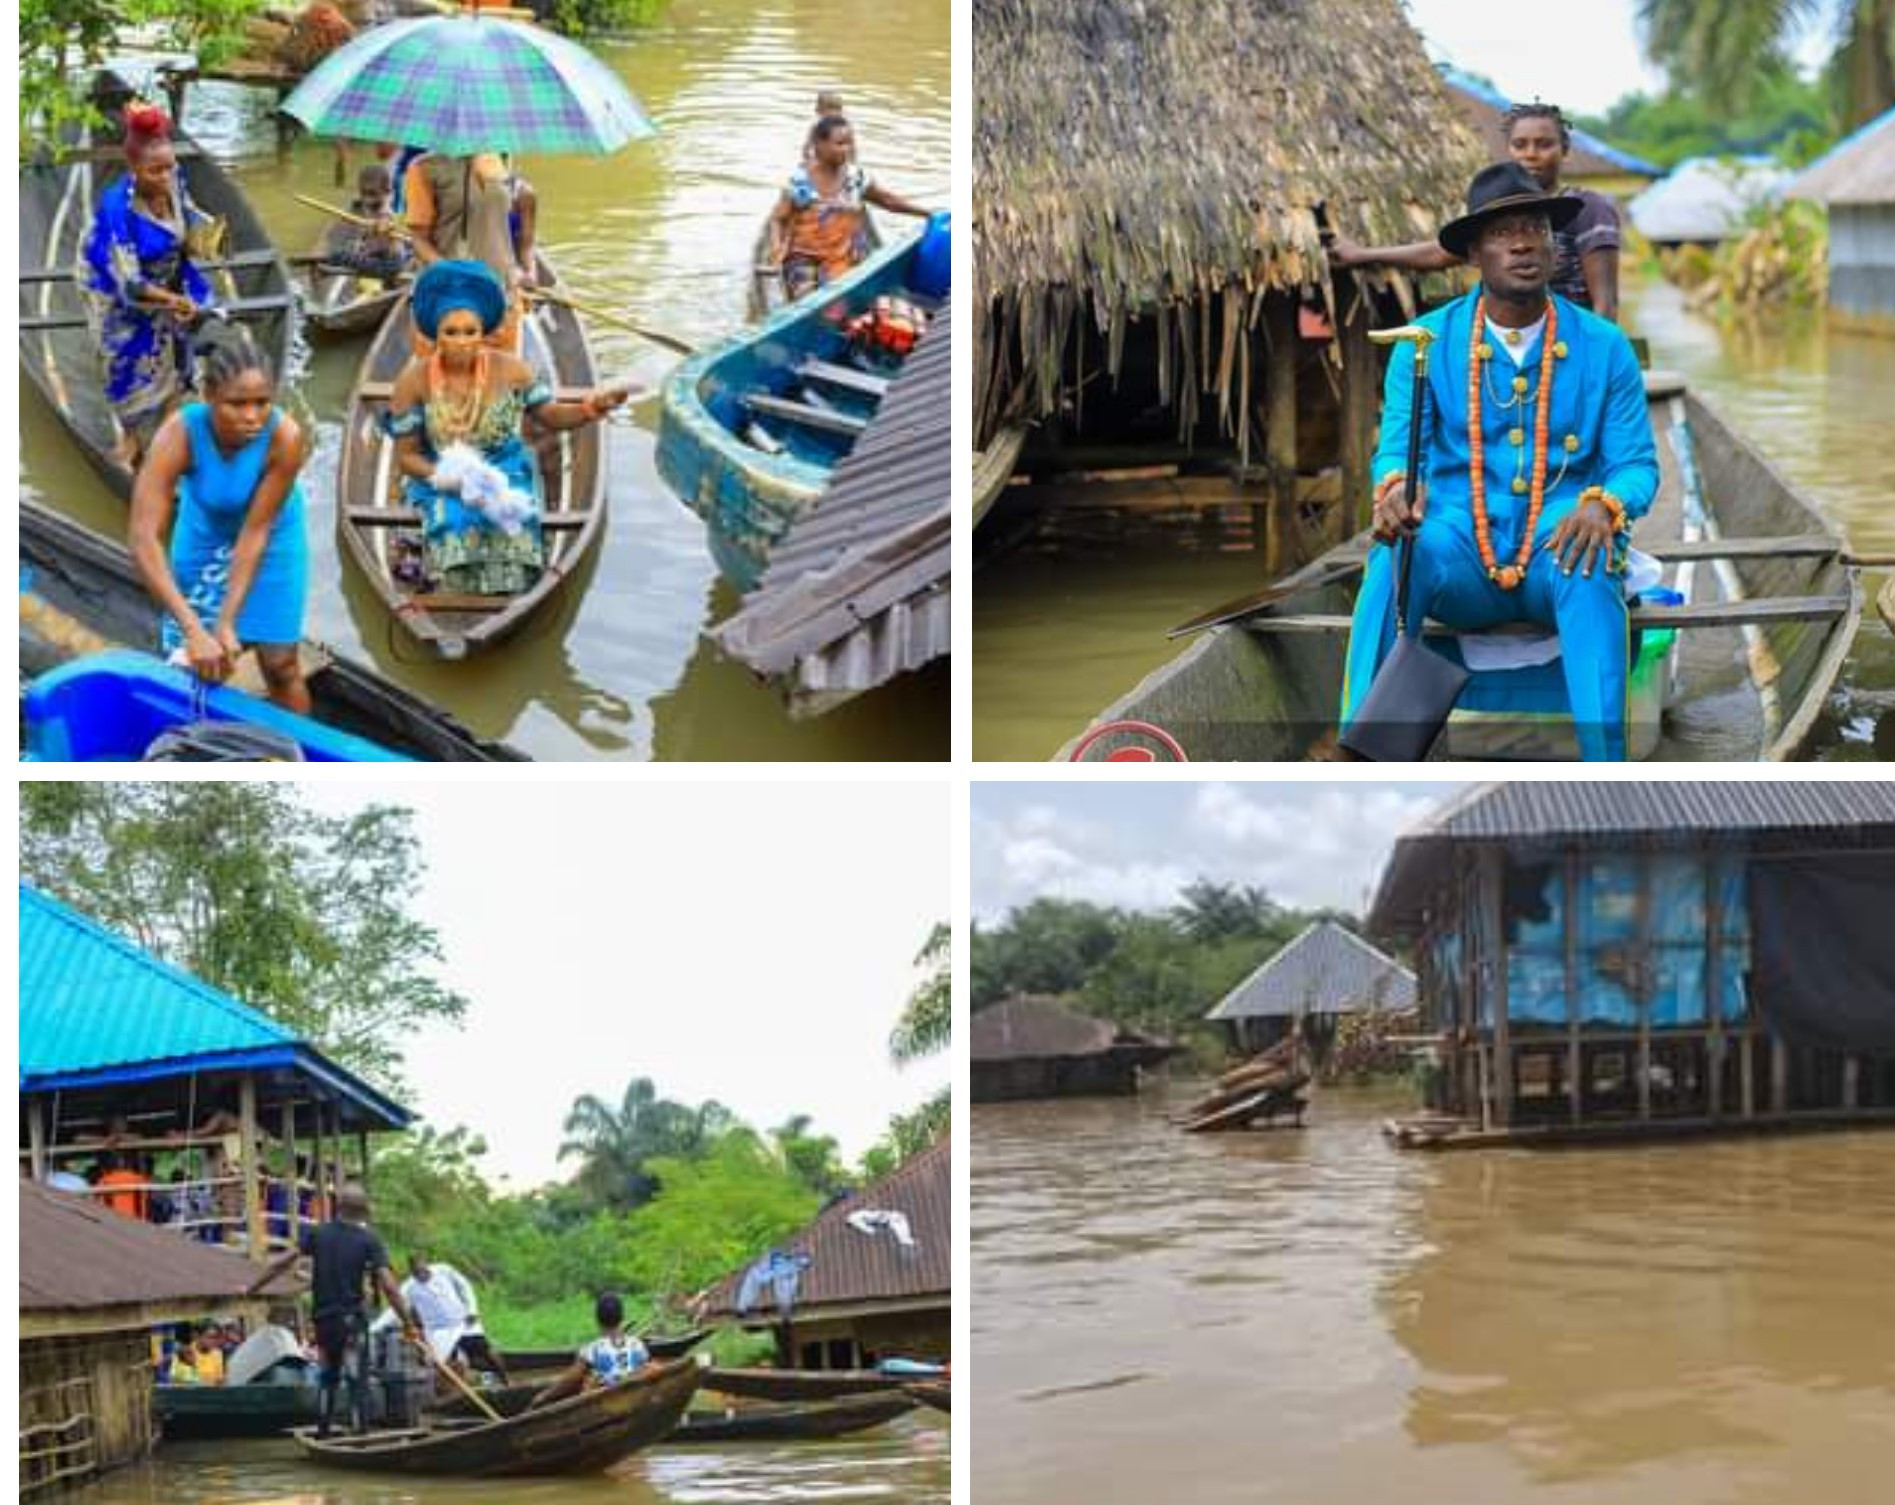 Delta couple performs their traditional marriage rites amidst flooding